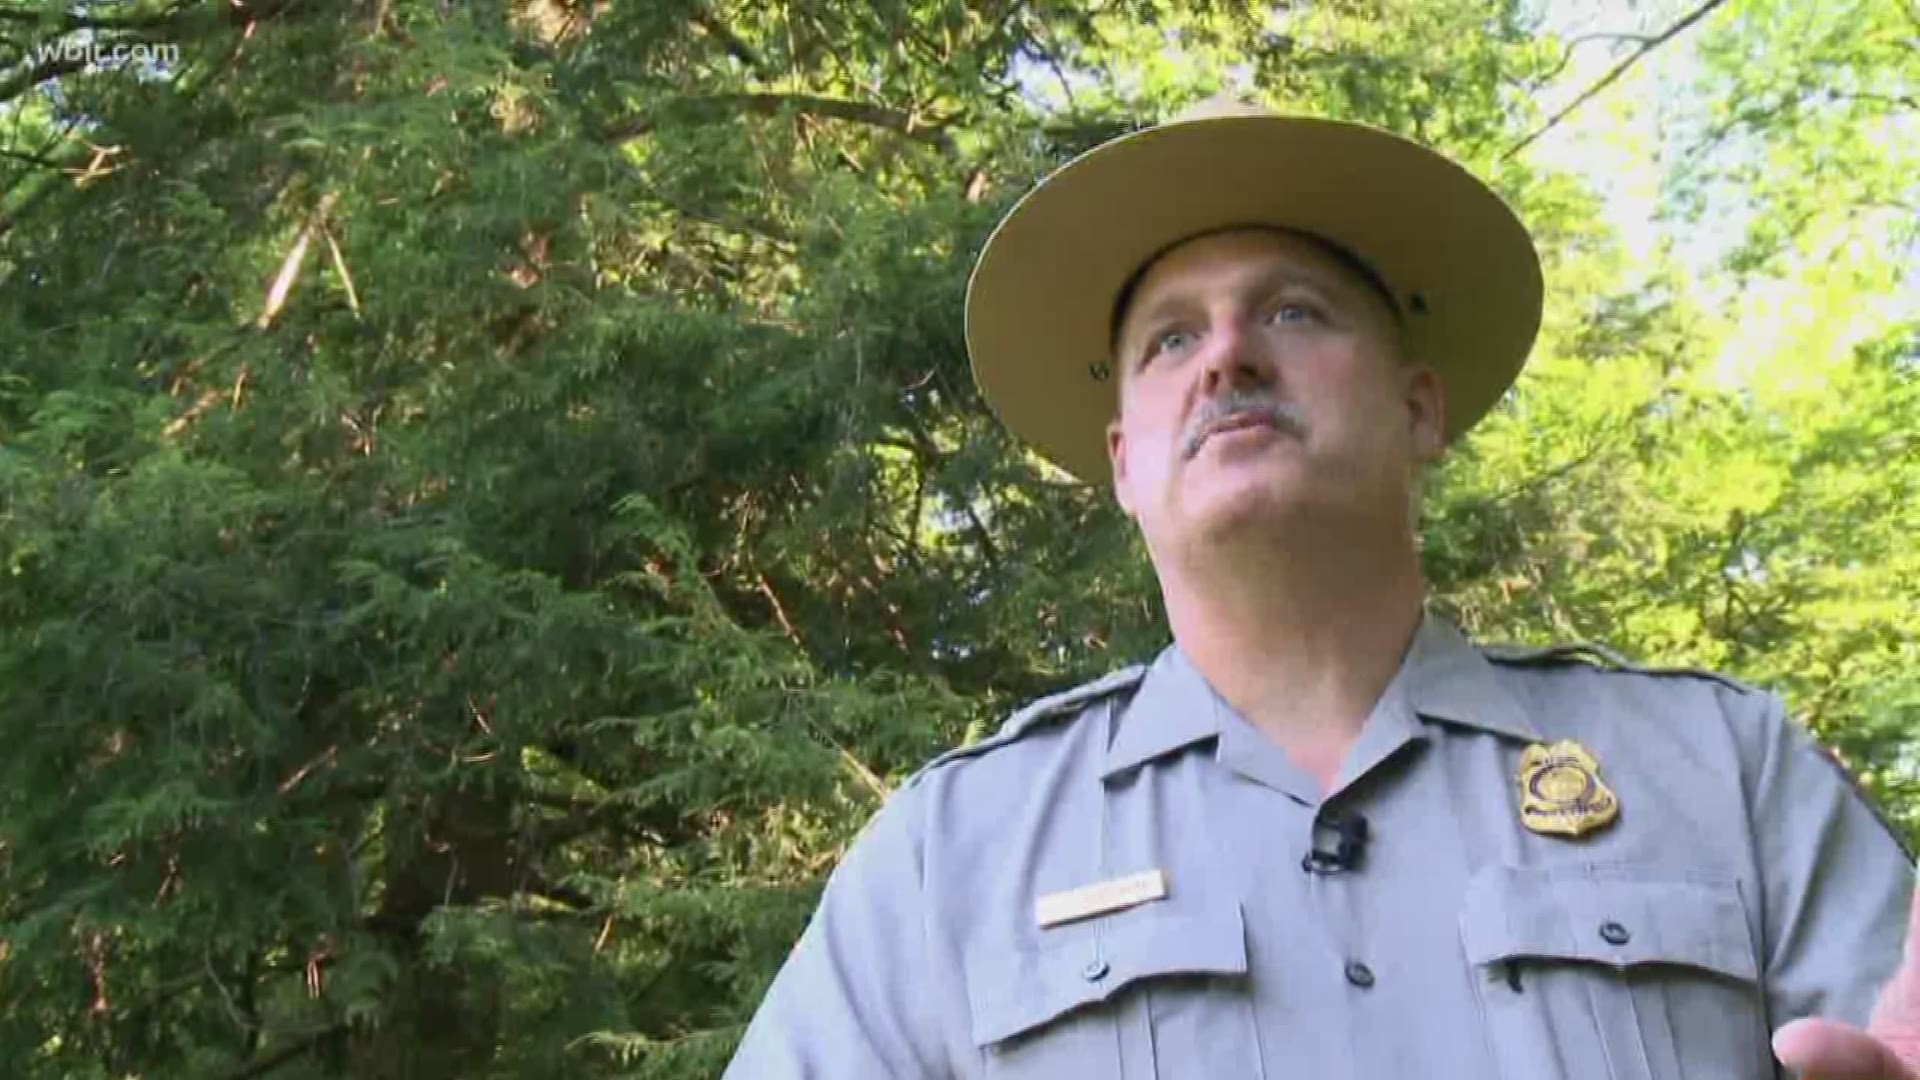 After 35 years with the National Park Service, the Chief Ranger of the Great Smoky Mountains is retiring. Steve Kloster was involved in hundreds of rescues and guided the park through the Blizzard of 93 and the Sevier County wildfires.